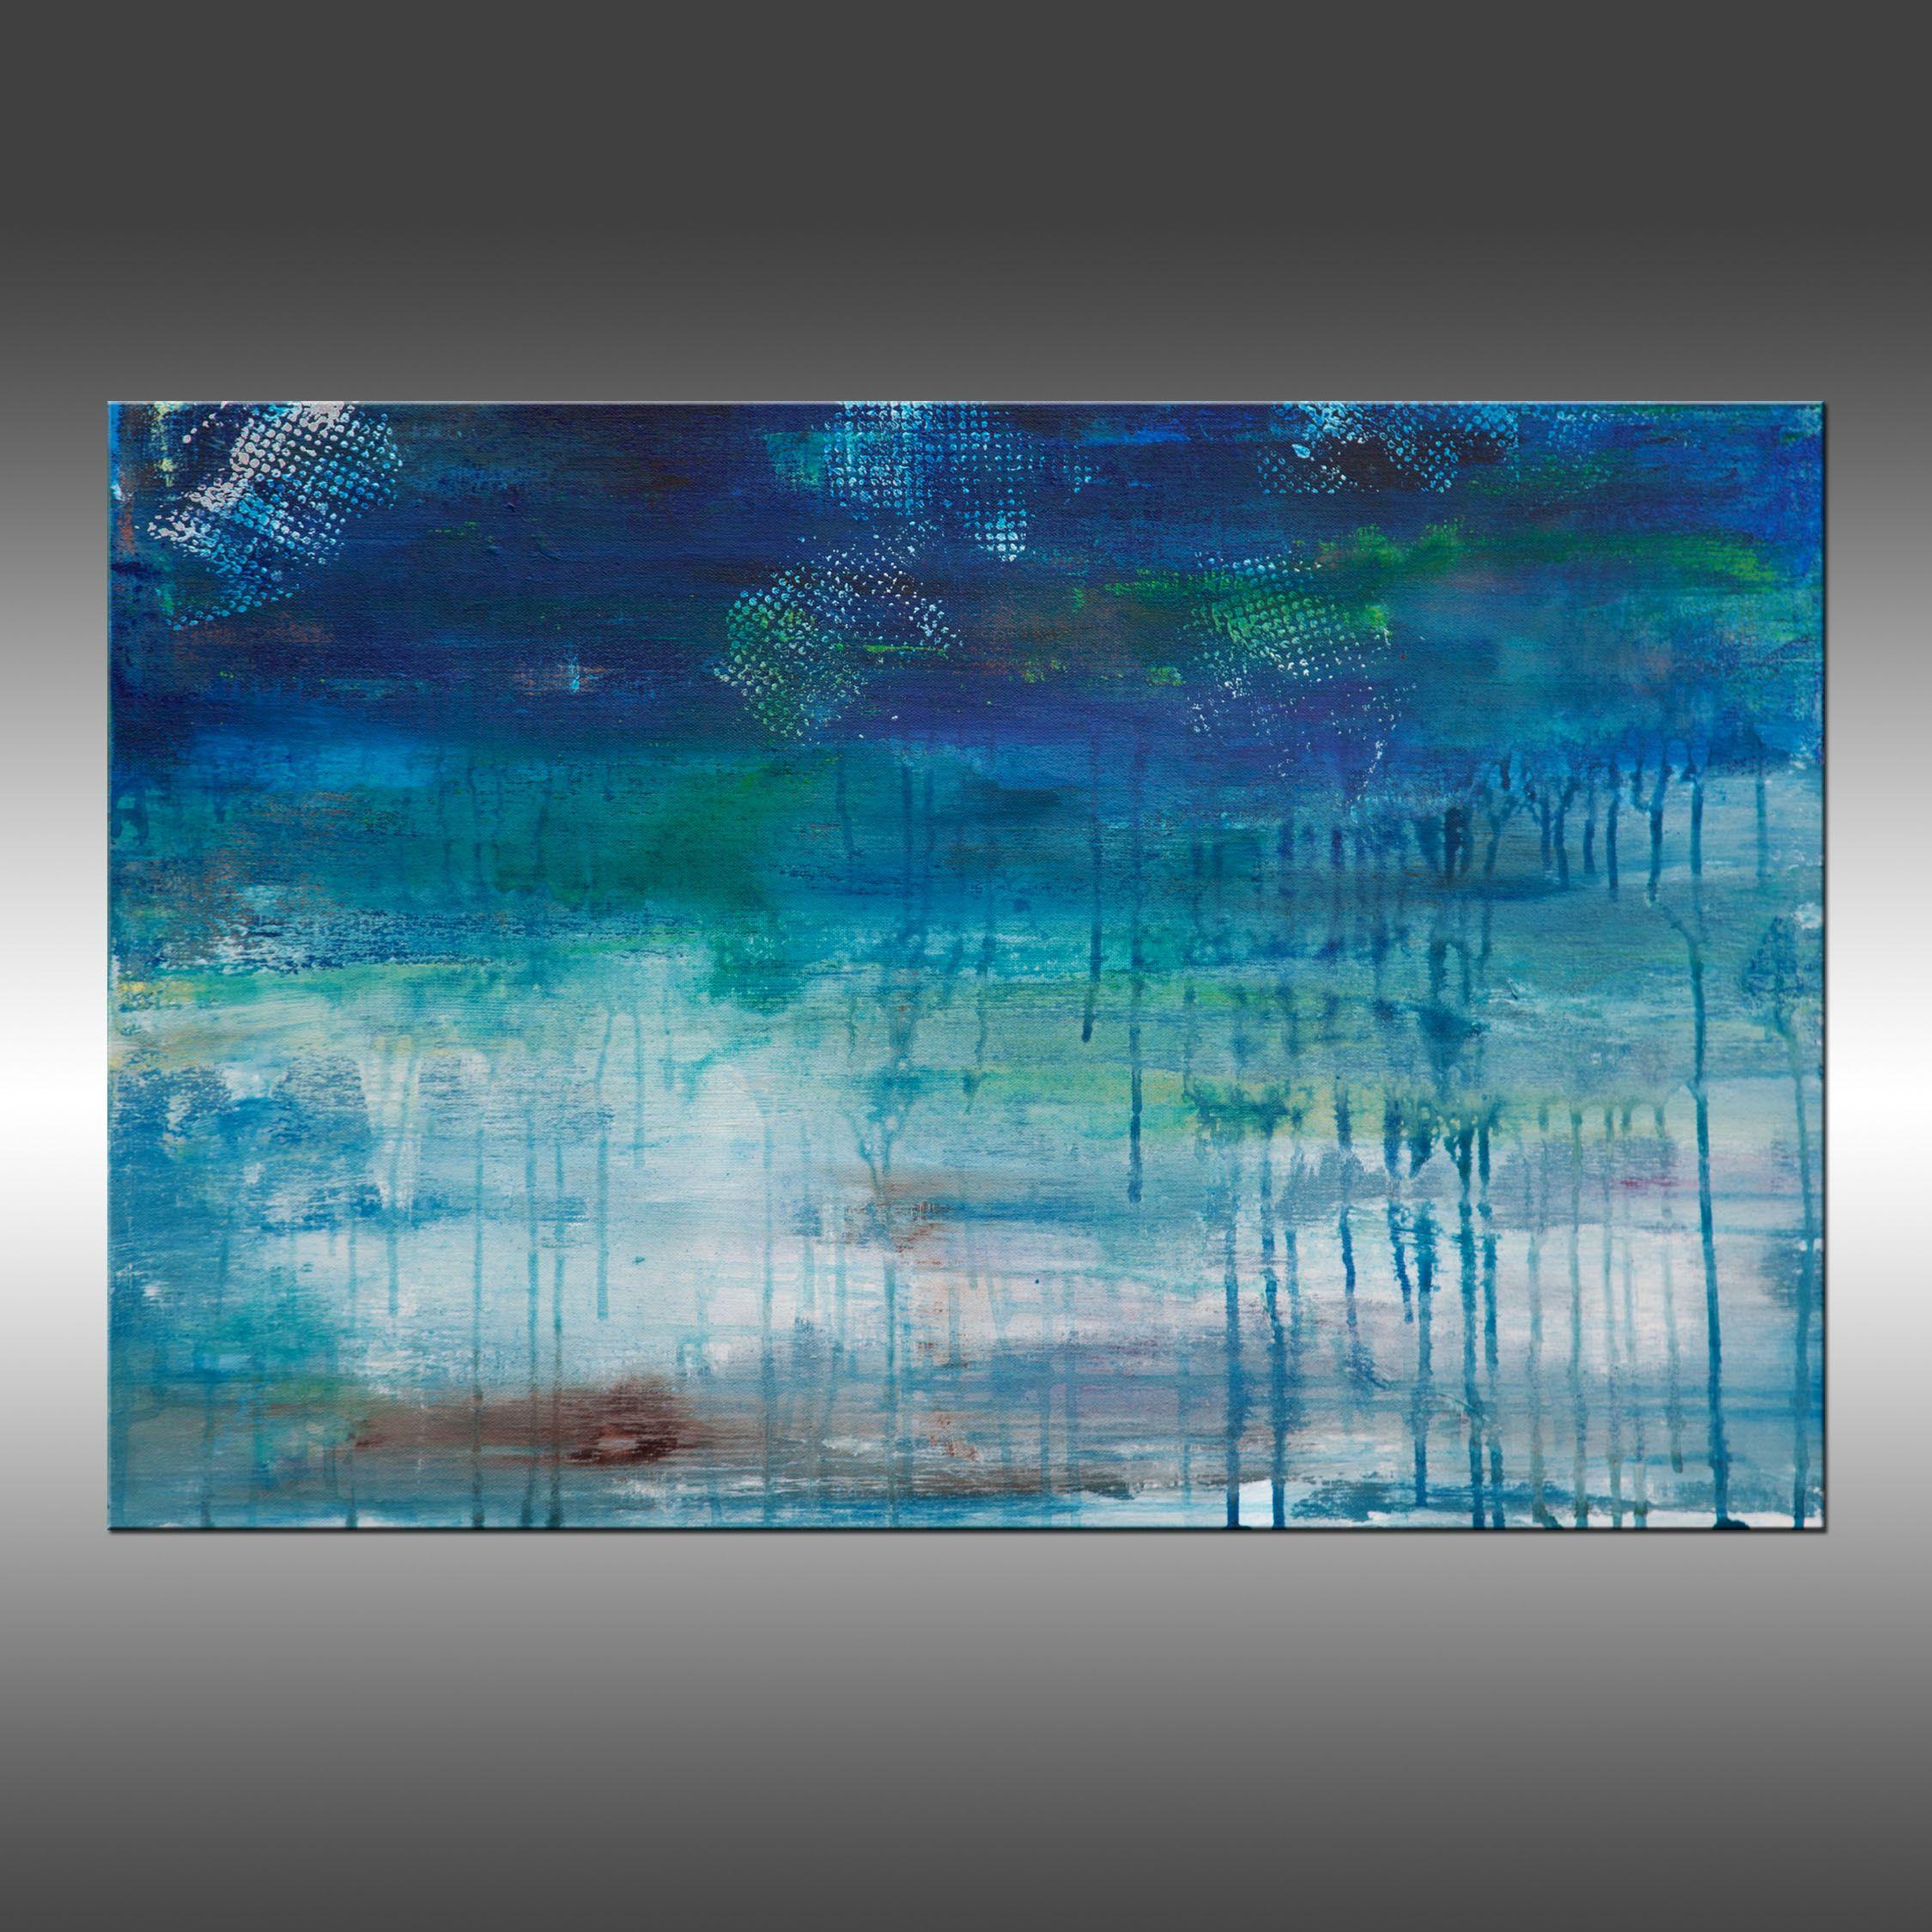 Lithosphere 185 is an original painting, created with acrylic paint on gallery-wrapped canvas. It has a width of 30 inches and a height of 20 inches with a depth of 1.5 inches (20x30x1.5).    The colors used in the painting are teal, blue, green,